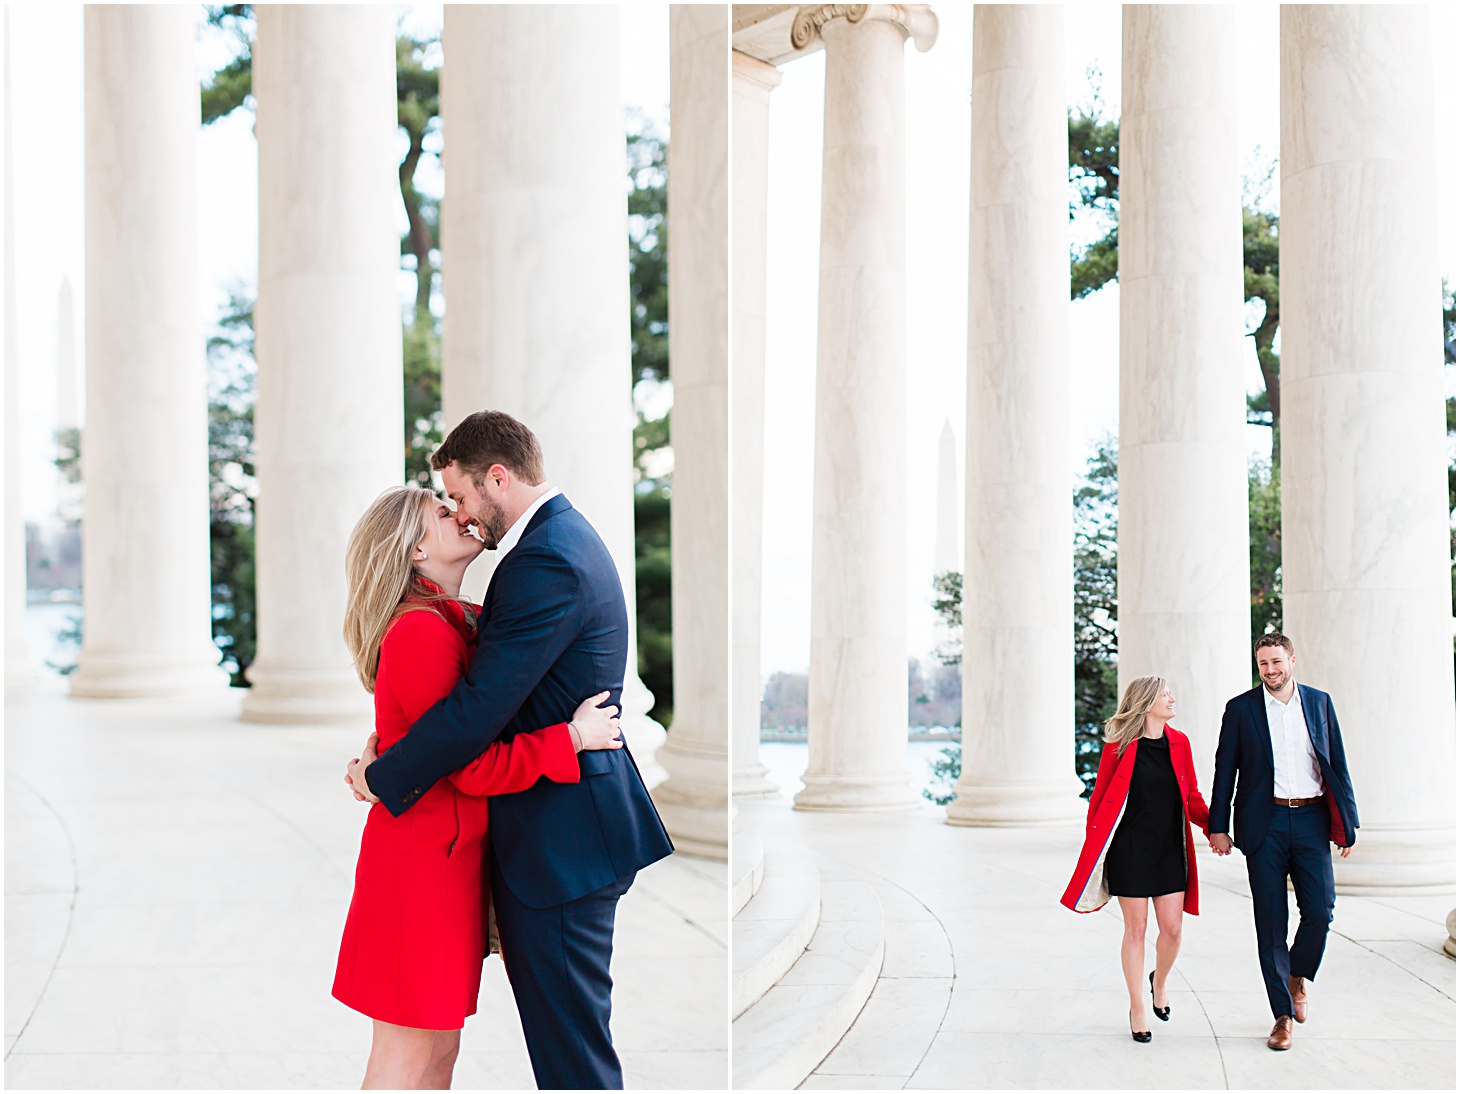 Winter Engagement Session at Jefferson Memorial in DC | Sarah Bradshaw Photography